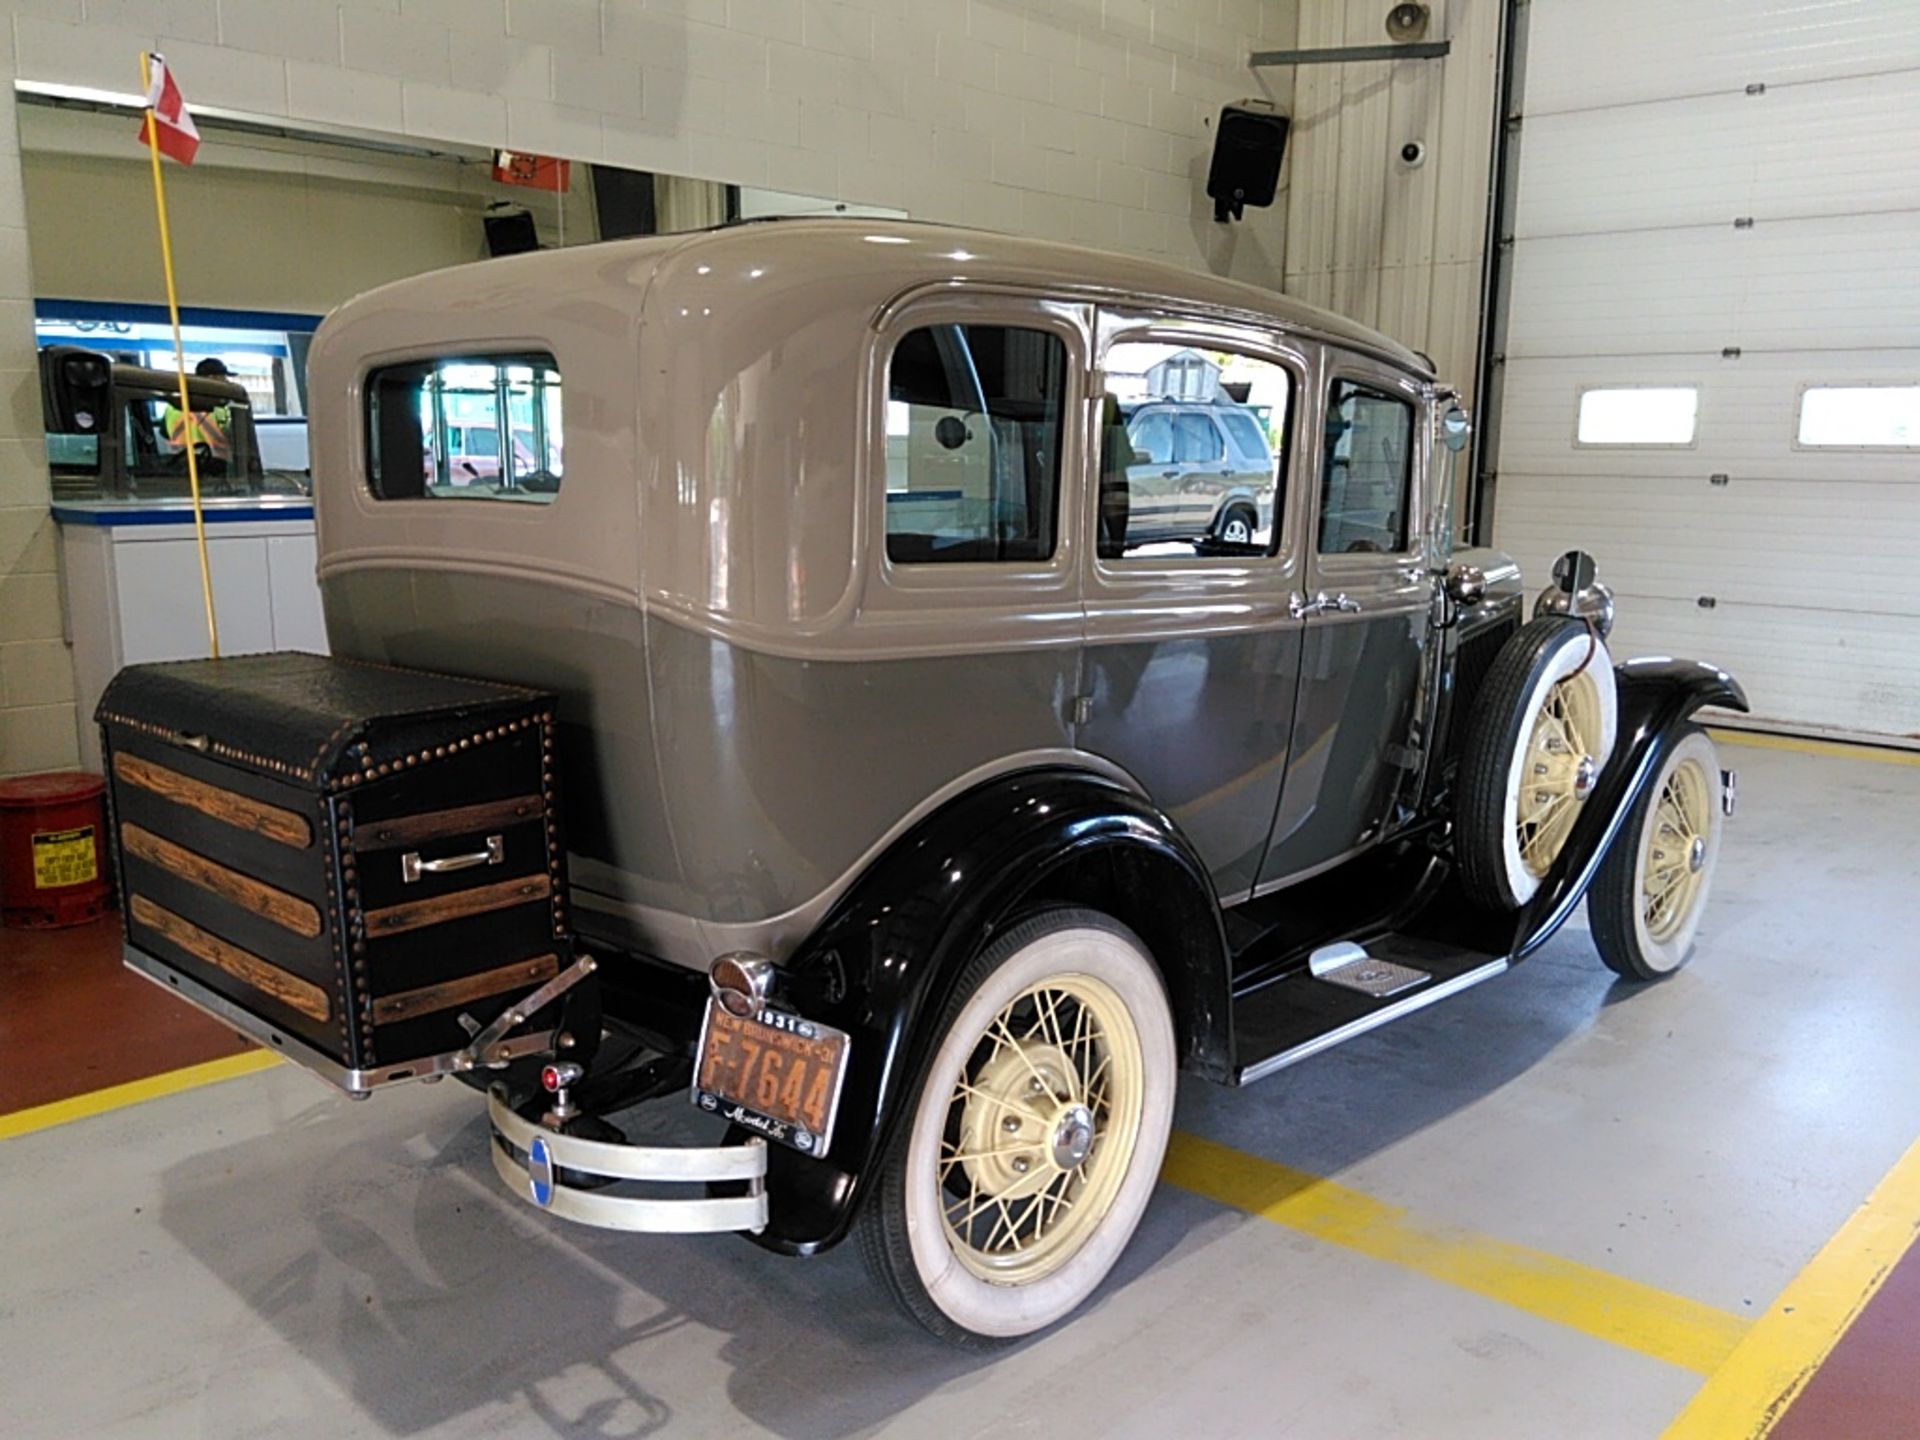 ** ON SALE ** Ford Model A Car 3.3L 4 Cylinder Engine 3 Speed Hard Top '1931 Year' RWD - ONLY 1,731 - Image 5 of 10